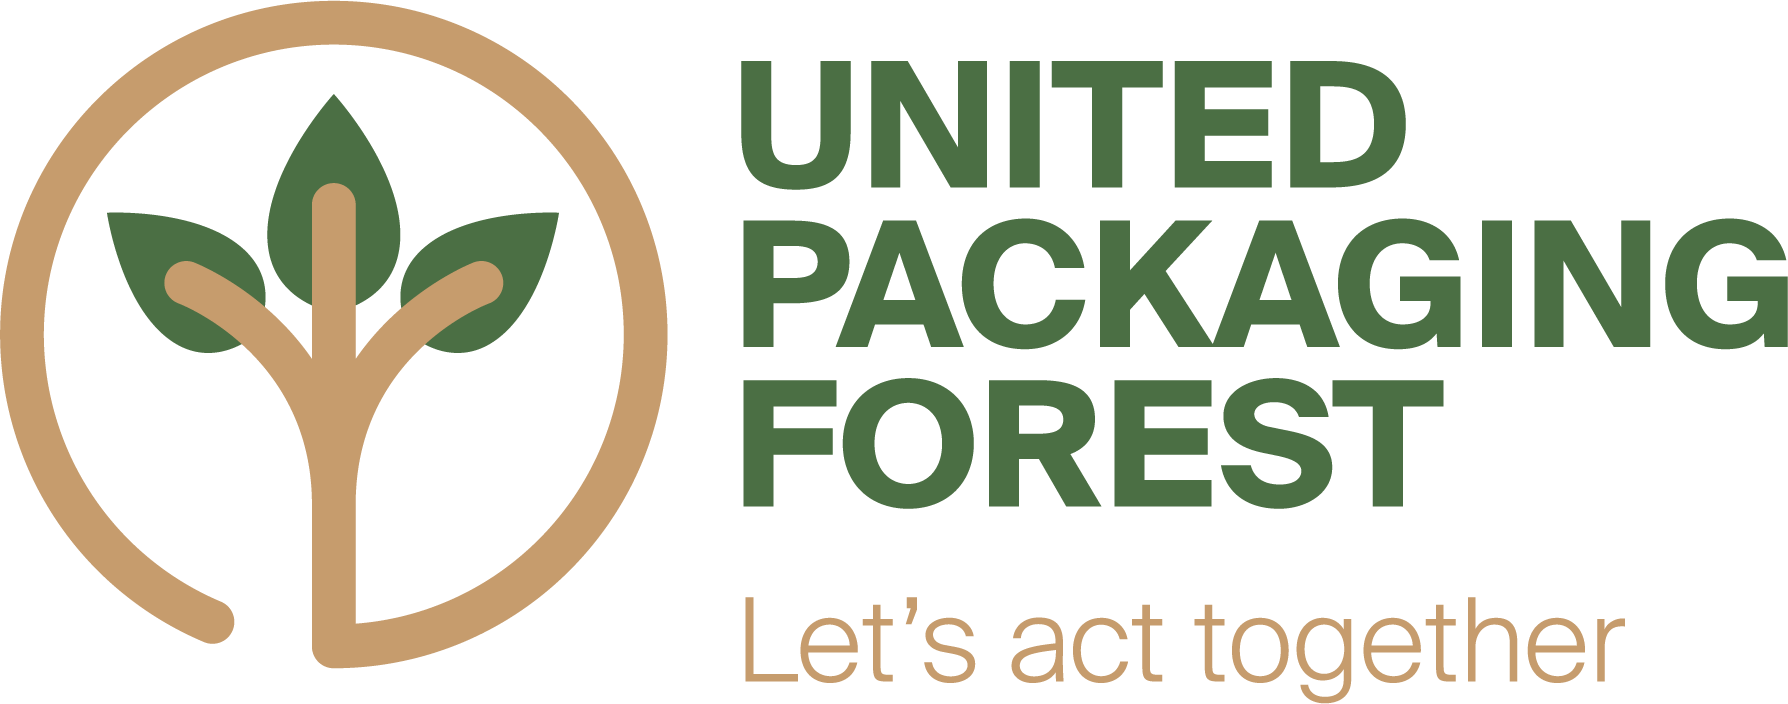 United Packaging Forest